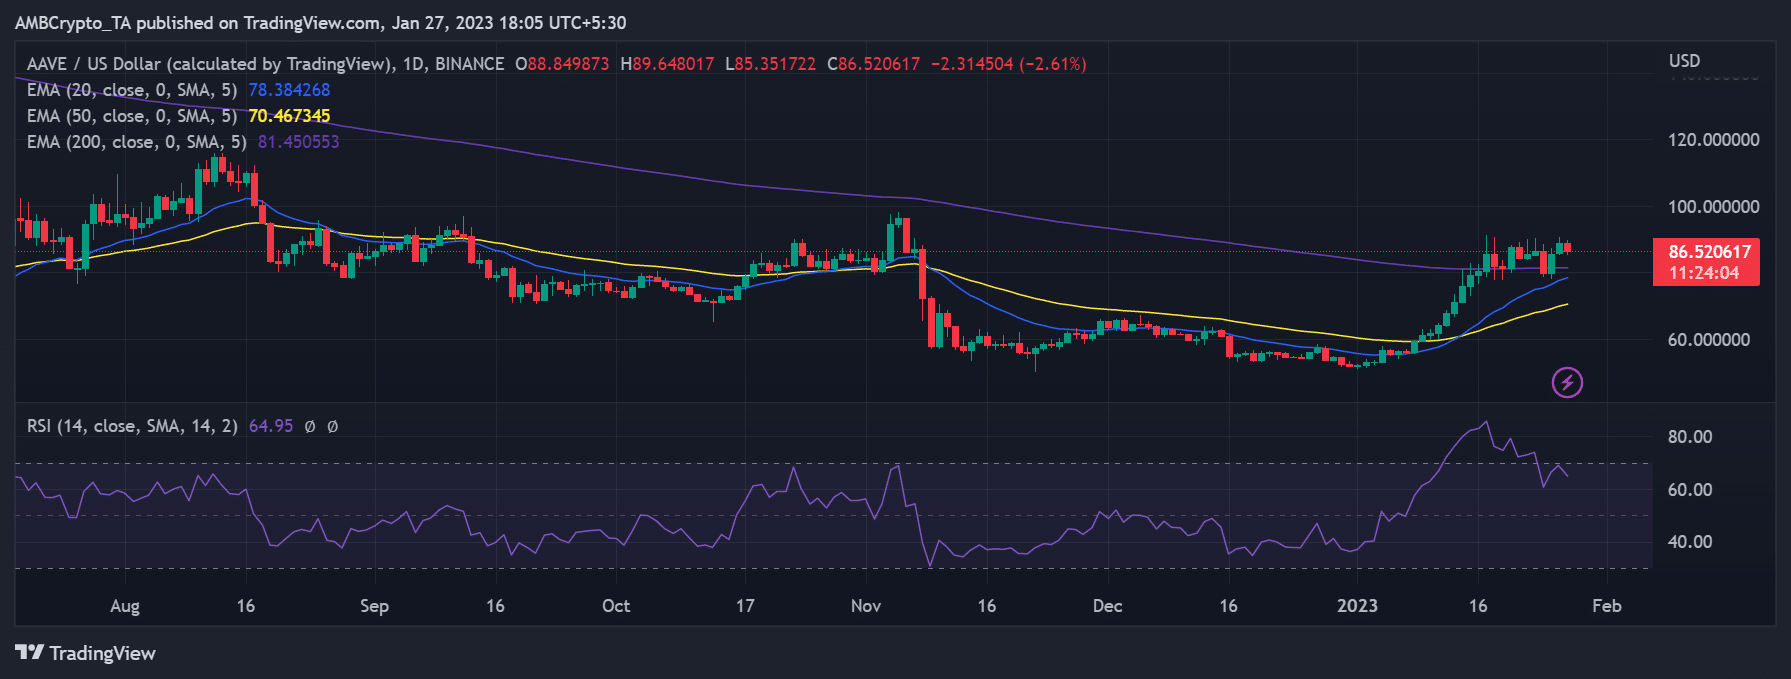 Aave (AAVE) price move